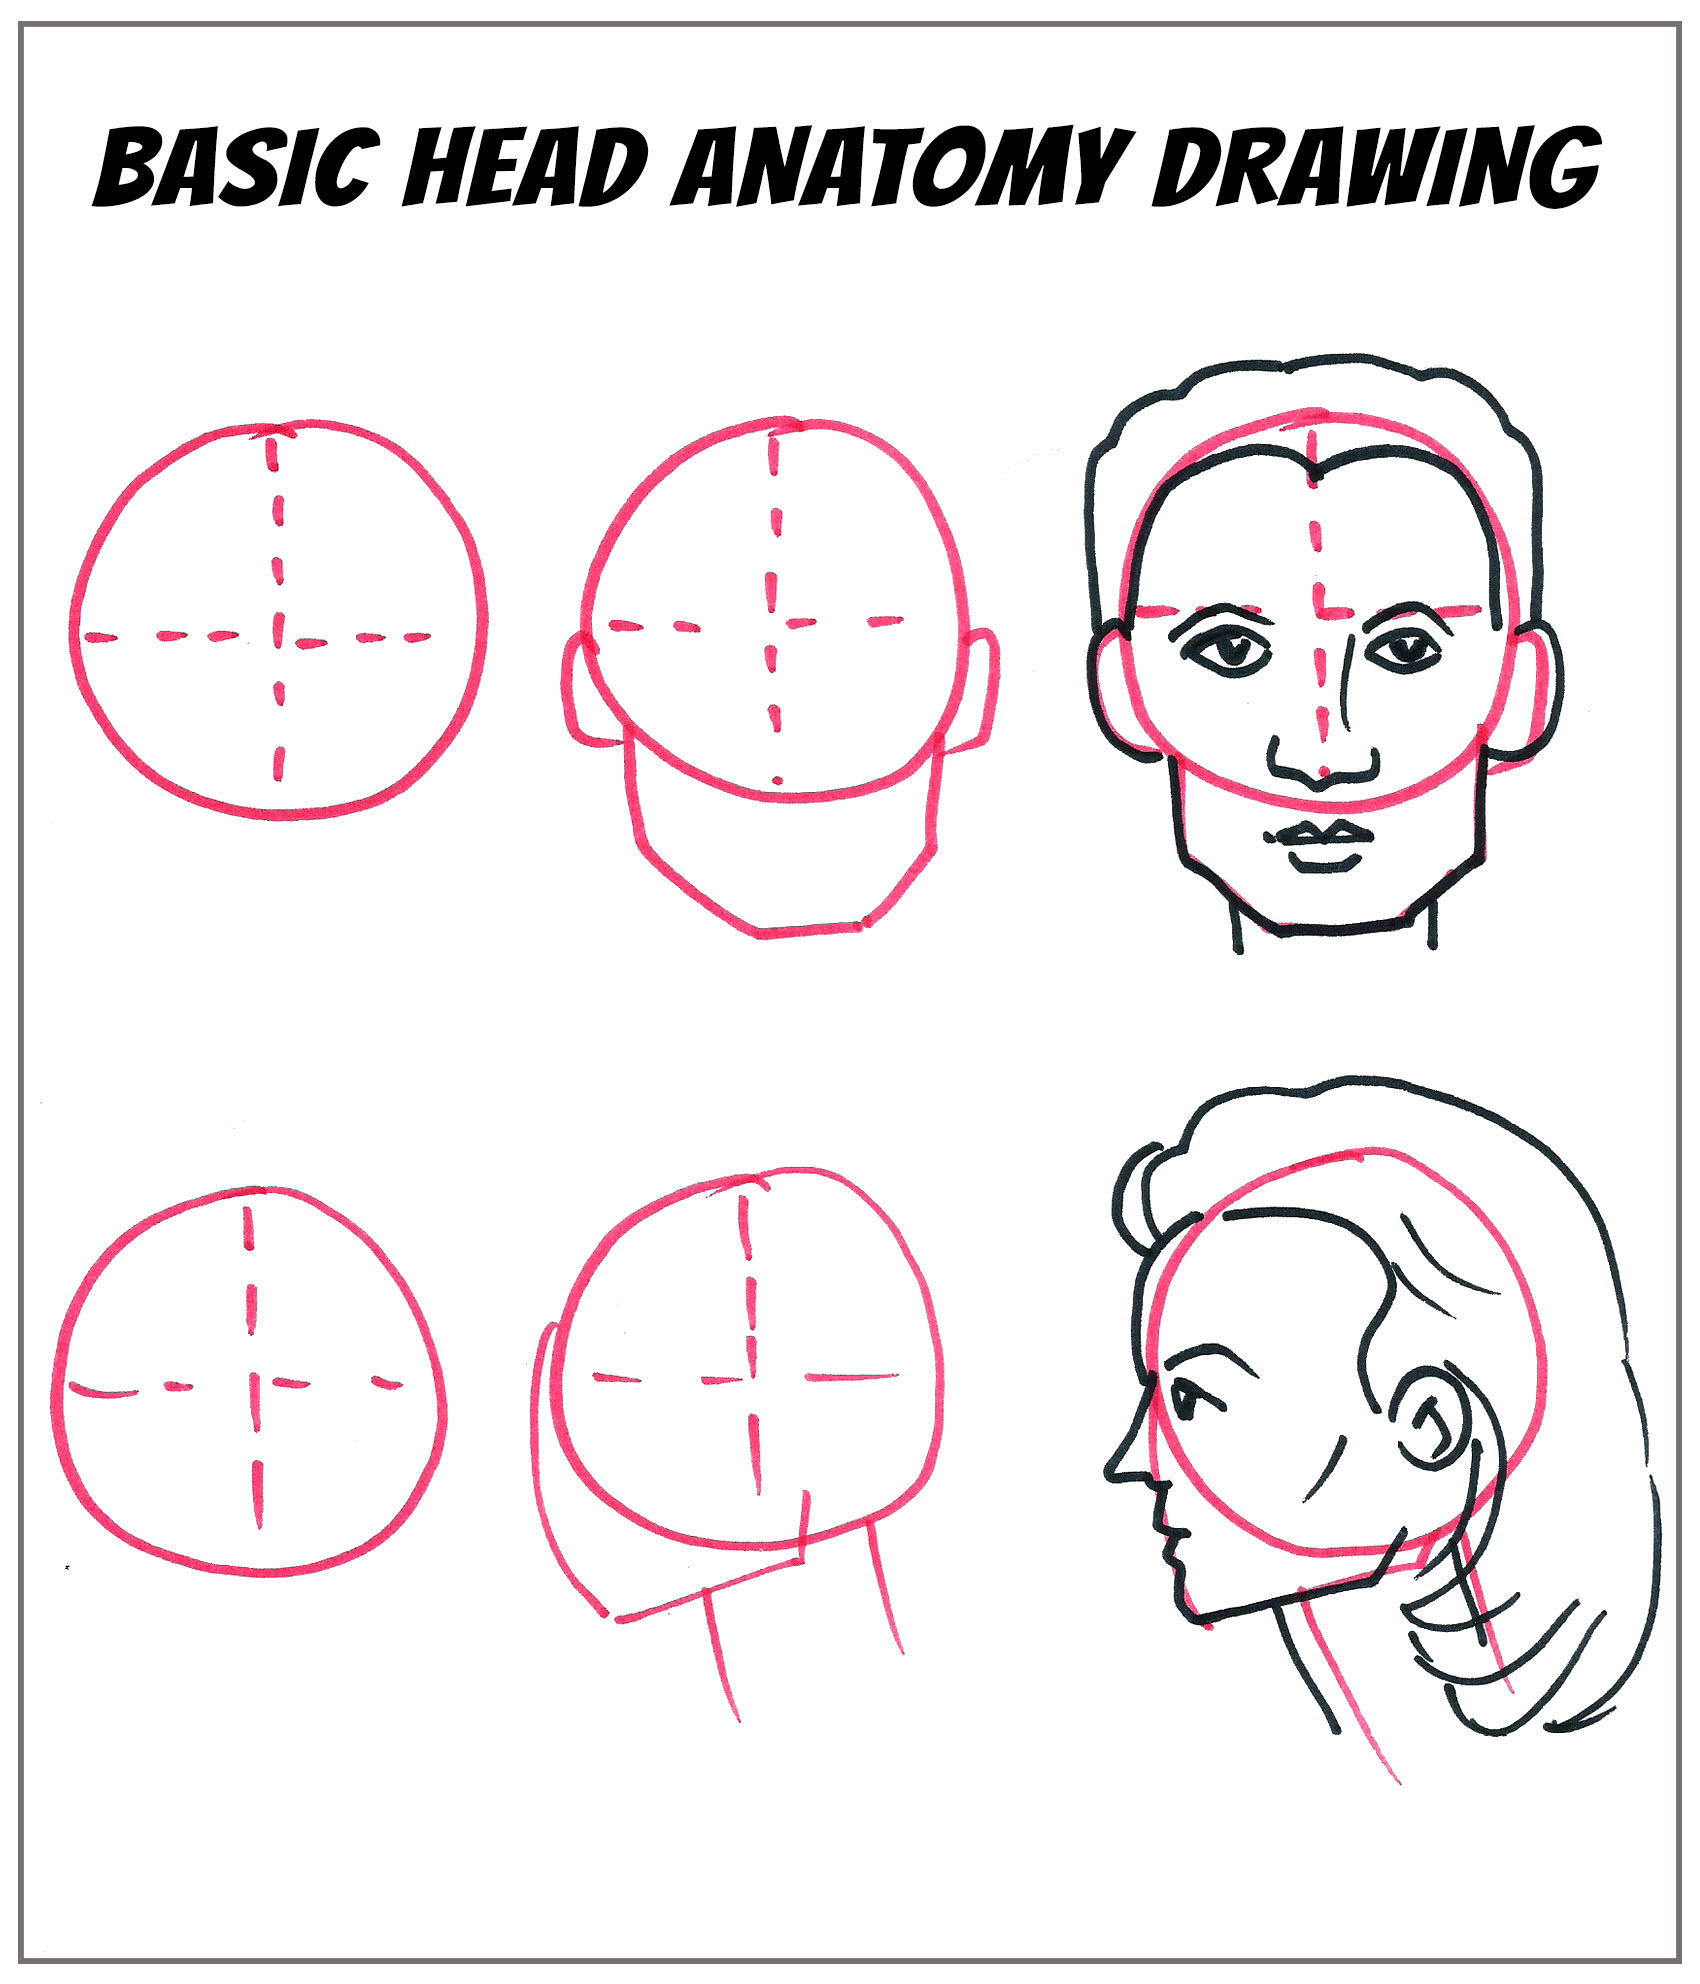 A Basic Head Anatomy  Virtual Event experience project by Yaymaker